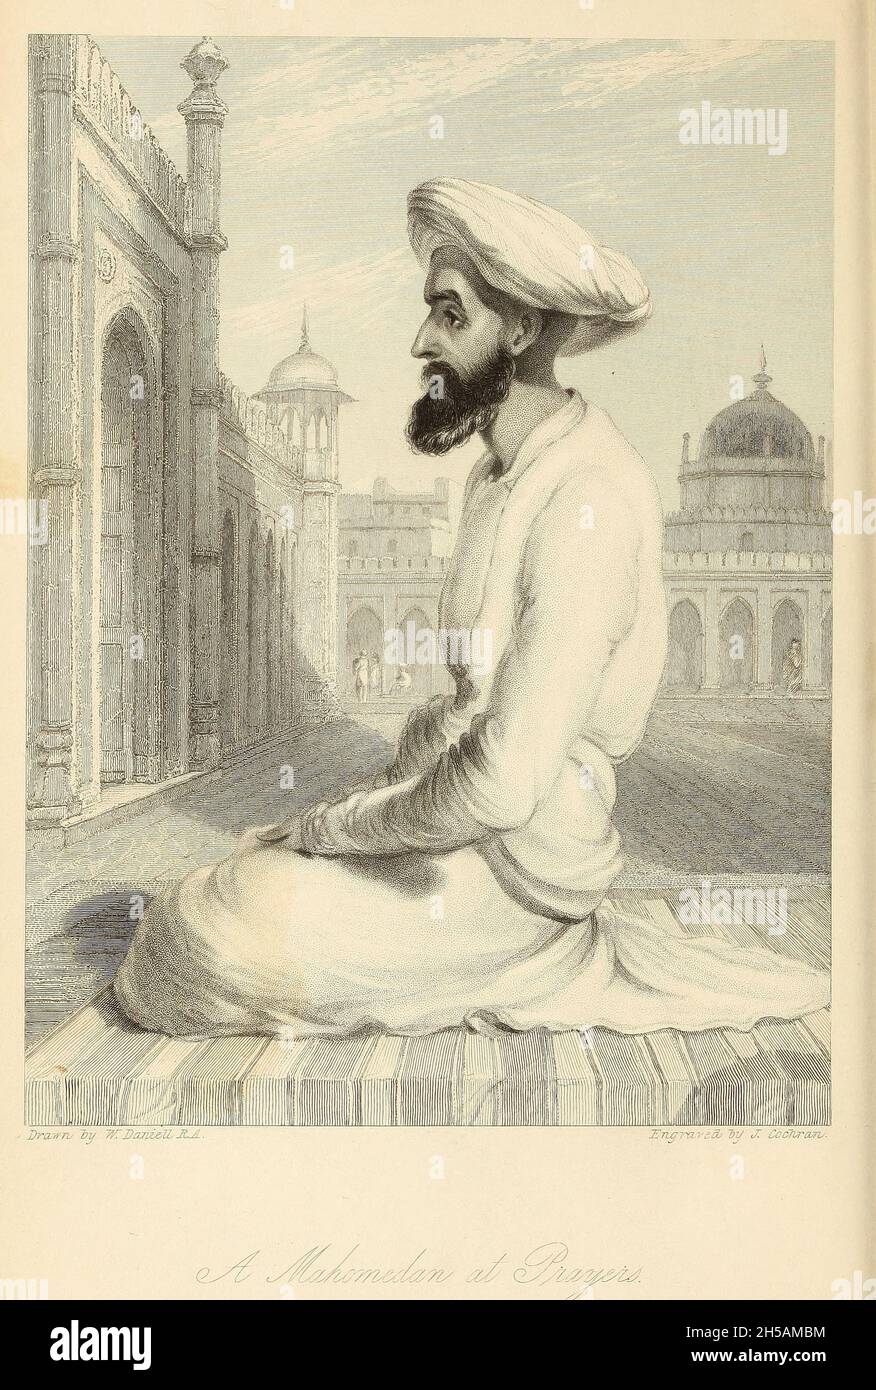 A MOHAMMEDAN AT PRAYERS From the book ' The Oriental annual, or, Lives of the Moghul Emperors ' by the Rev. Hobart Caunter Published by Edward Bull, London 1837 engravings from drawings by William Daniell Stock Photo